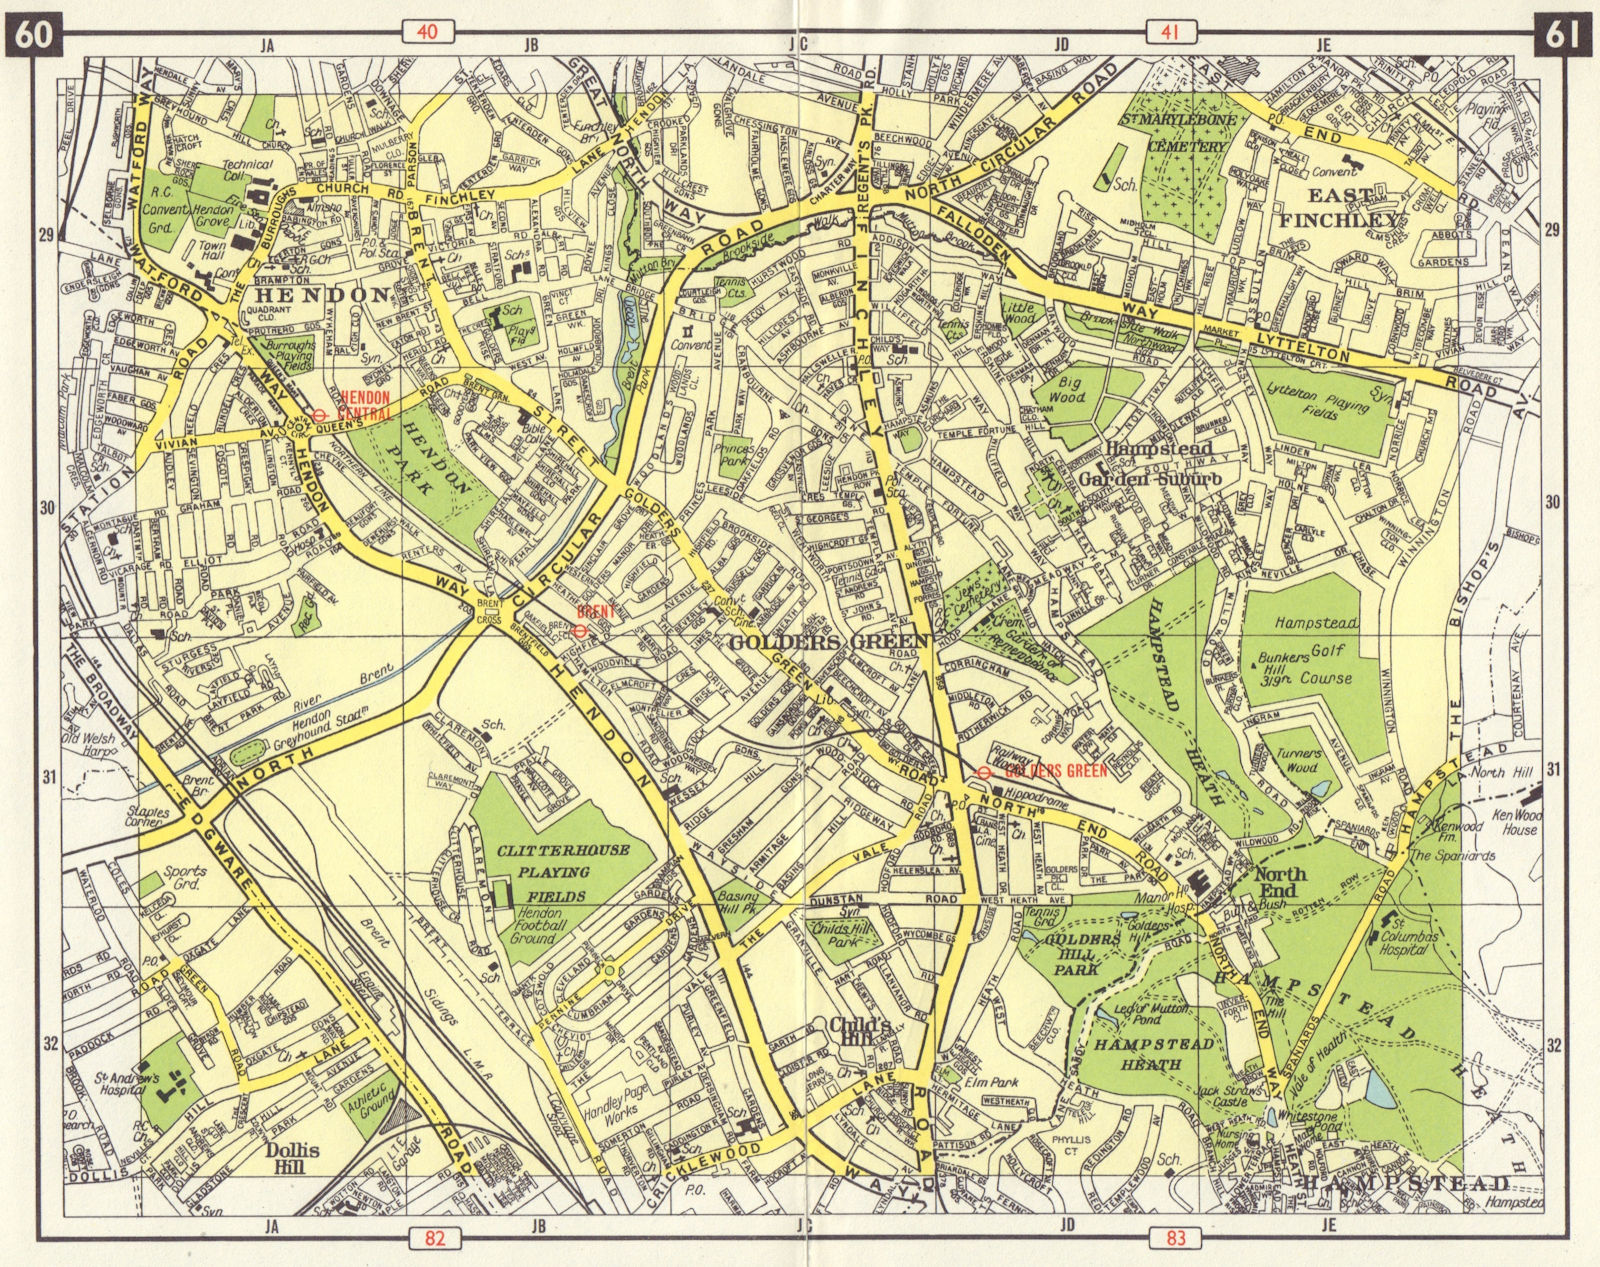 NW LONDON Hendon East Finchley Golder's Green Child's Hill North End 1965 map